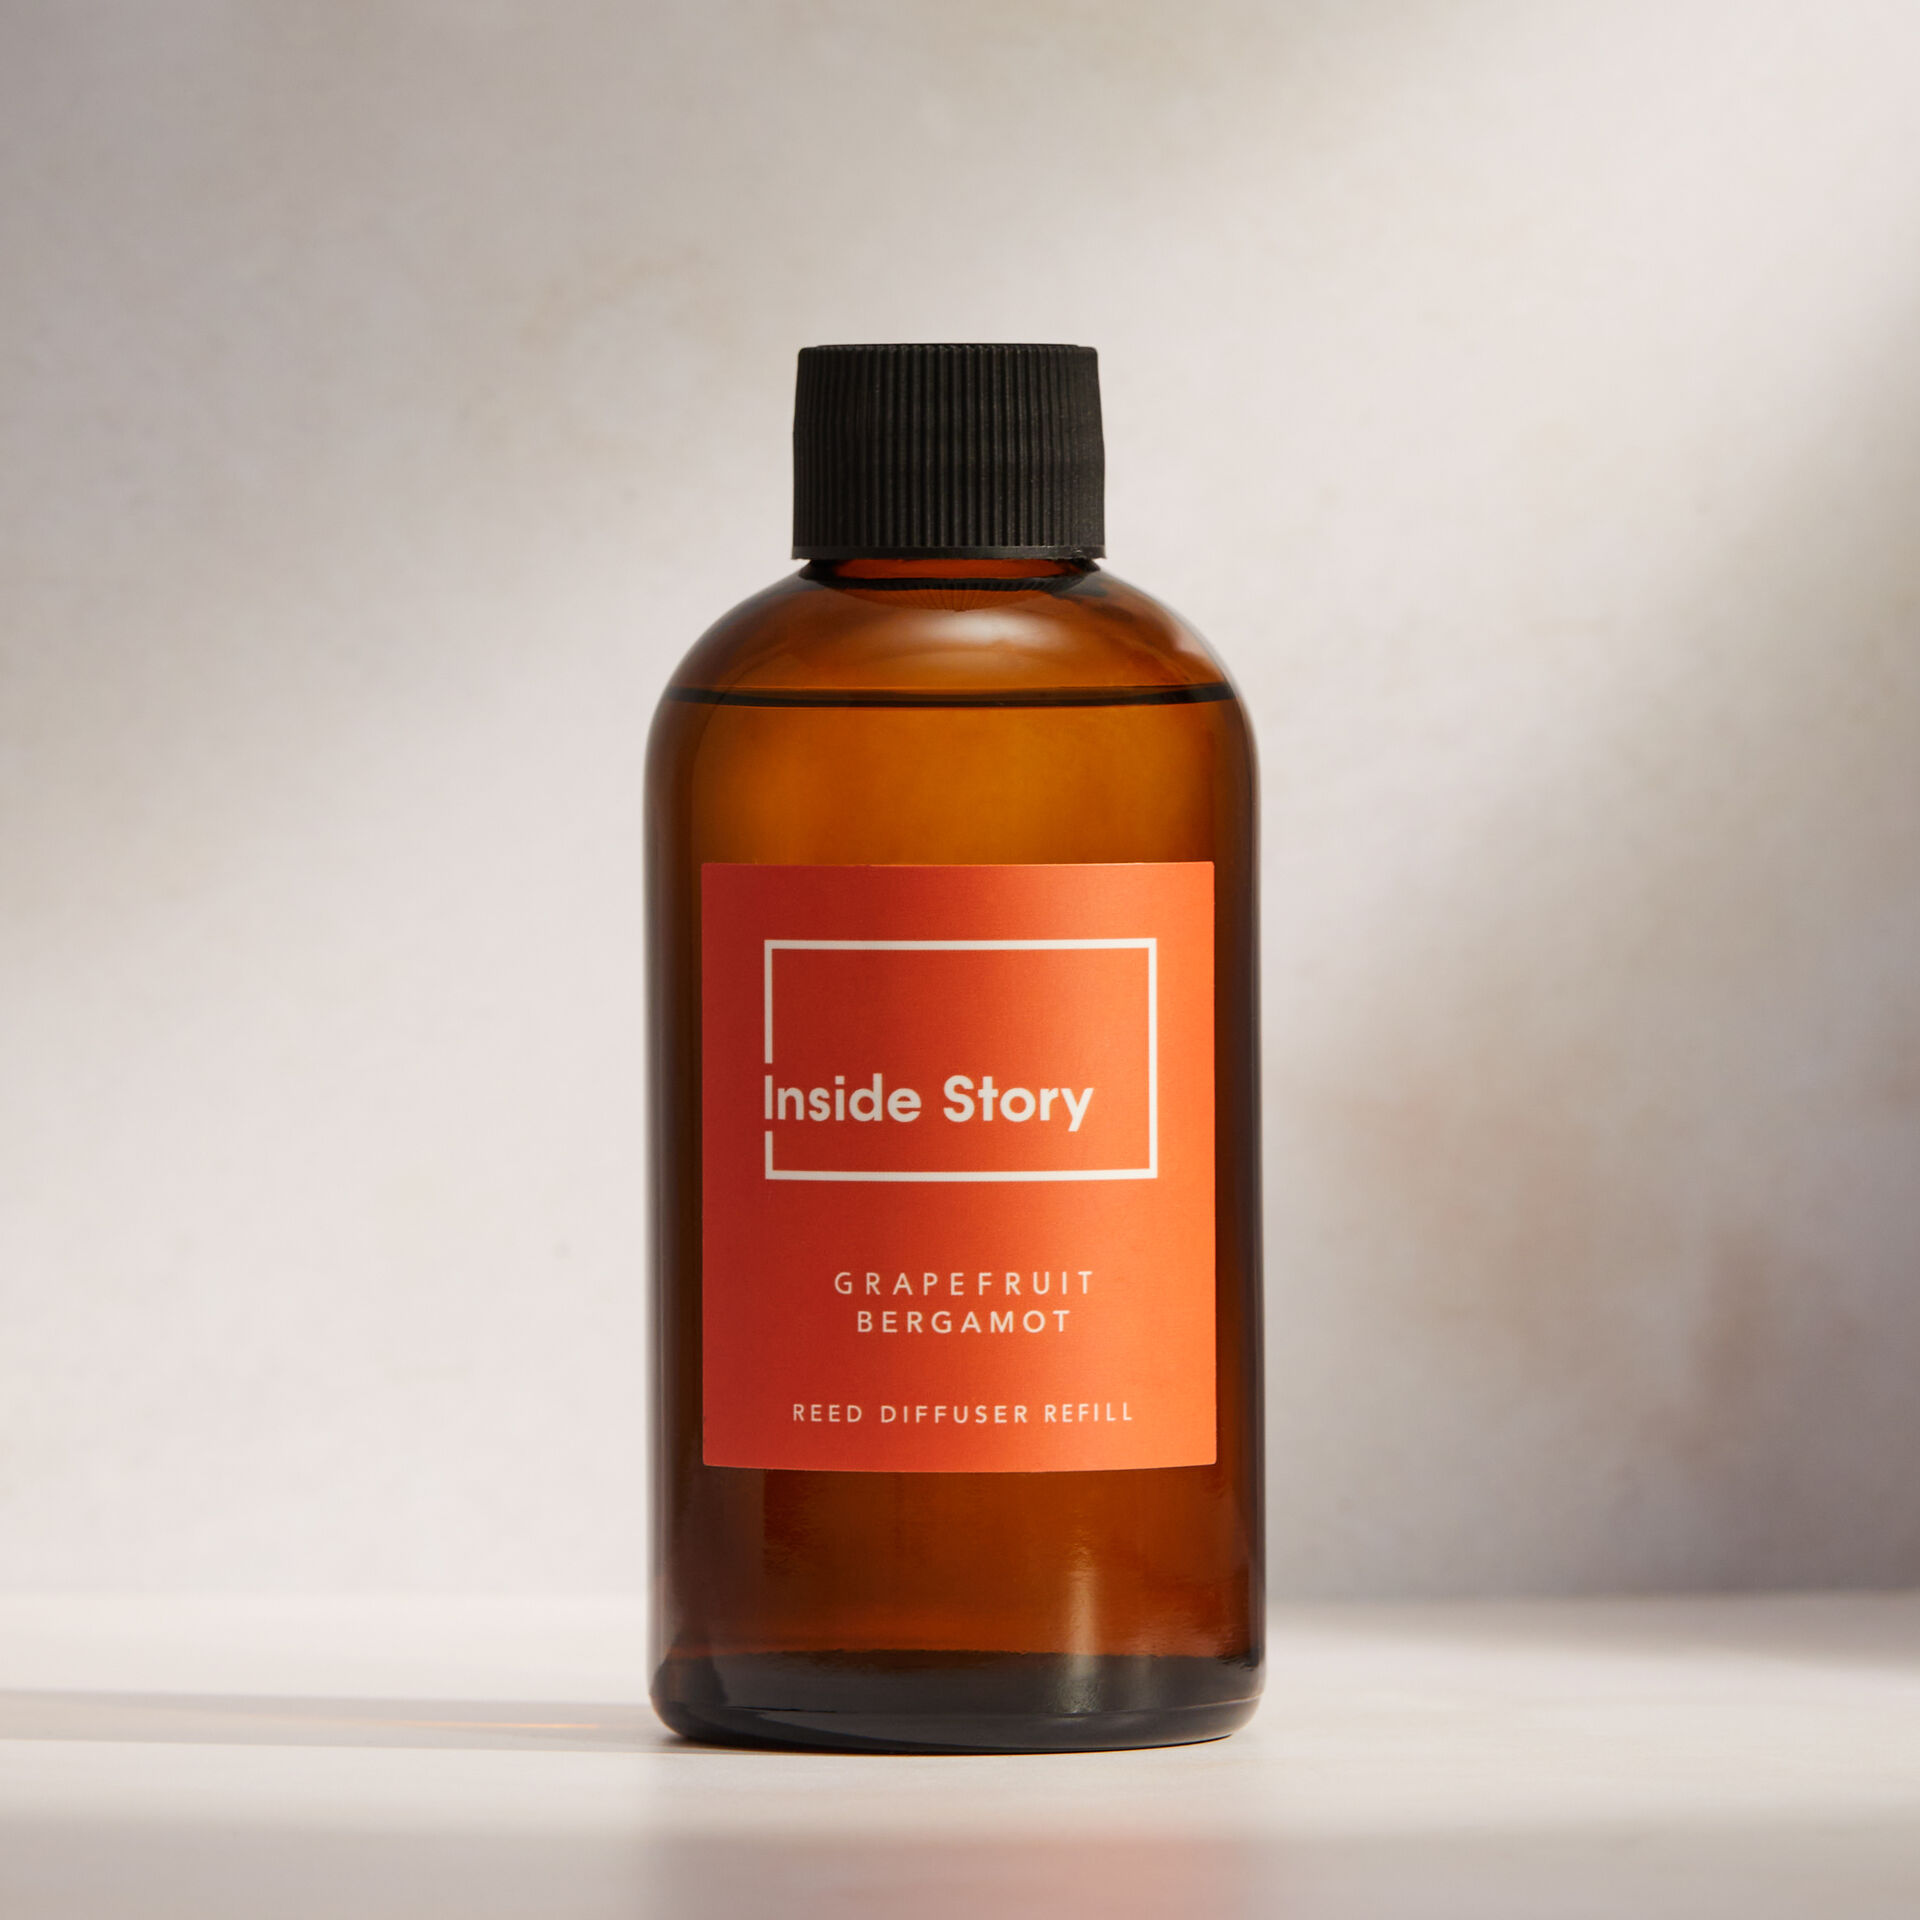 ${product-id}-Grapefruit And Bergamot Diffuser Refill-Neutral-${view-type}